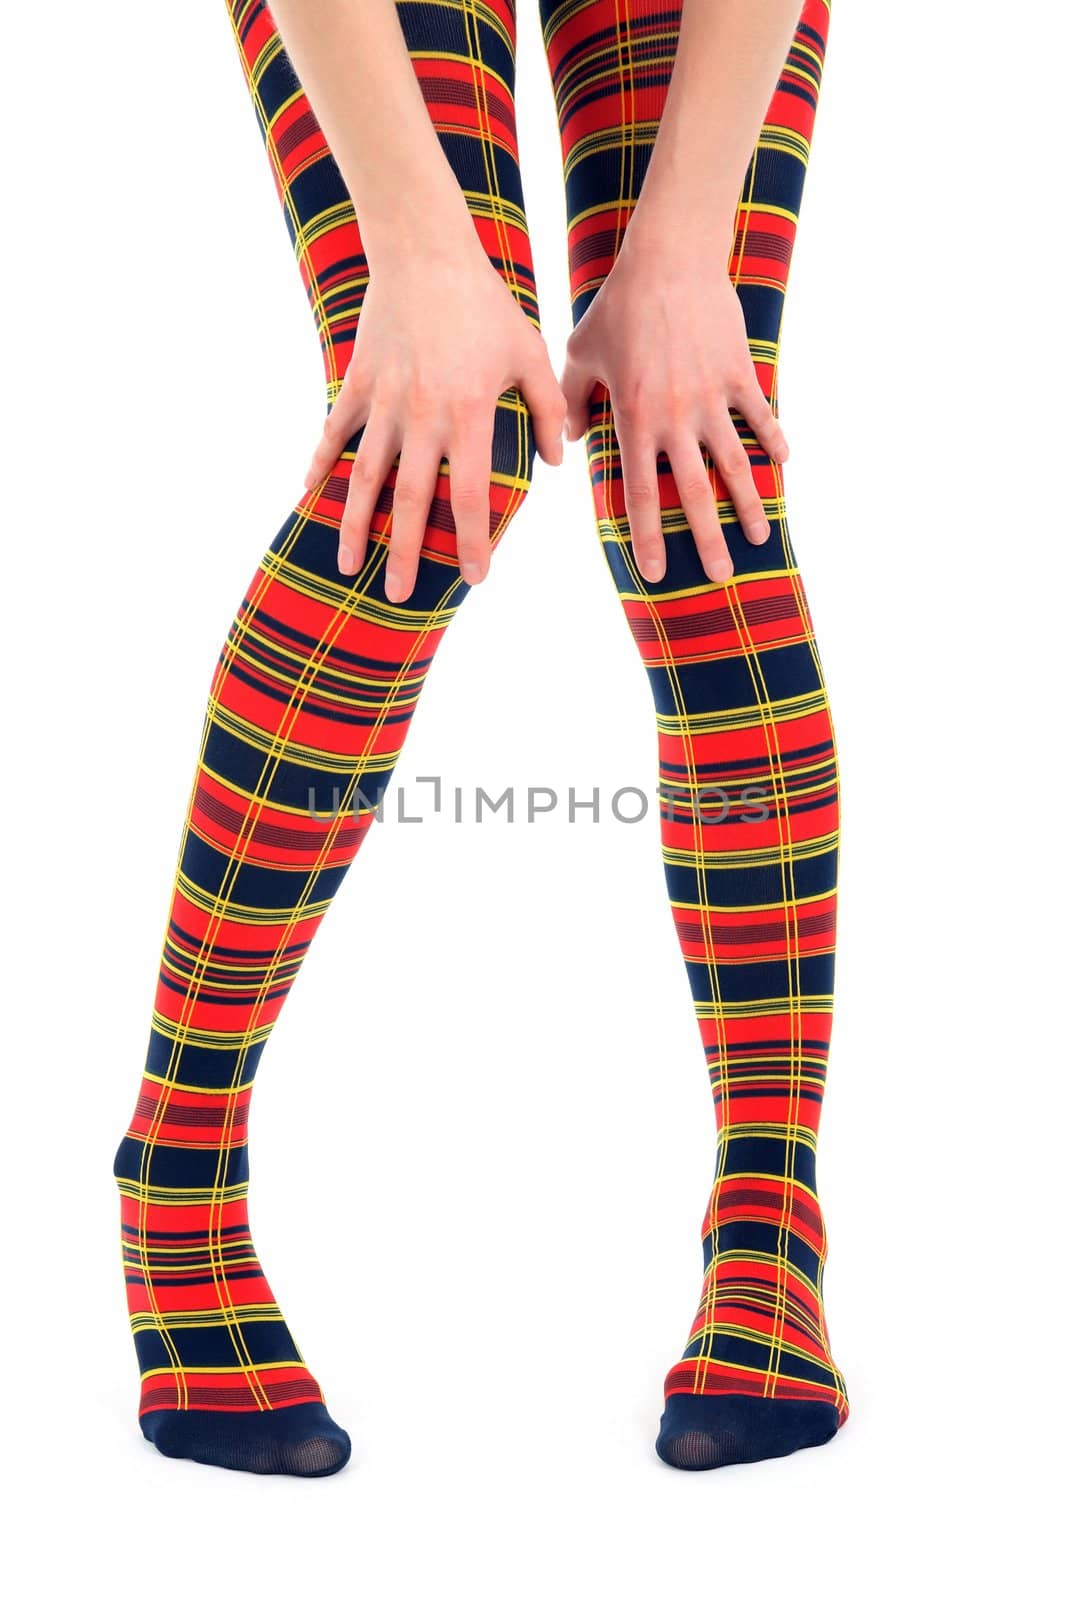 Funny legs in multicolored tights on white background.